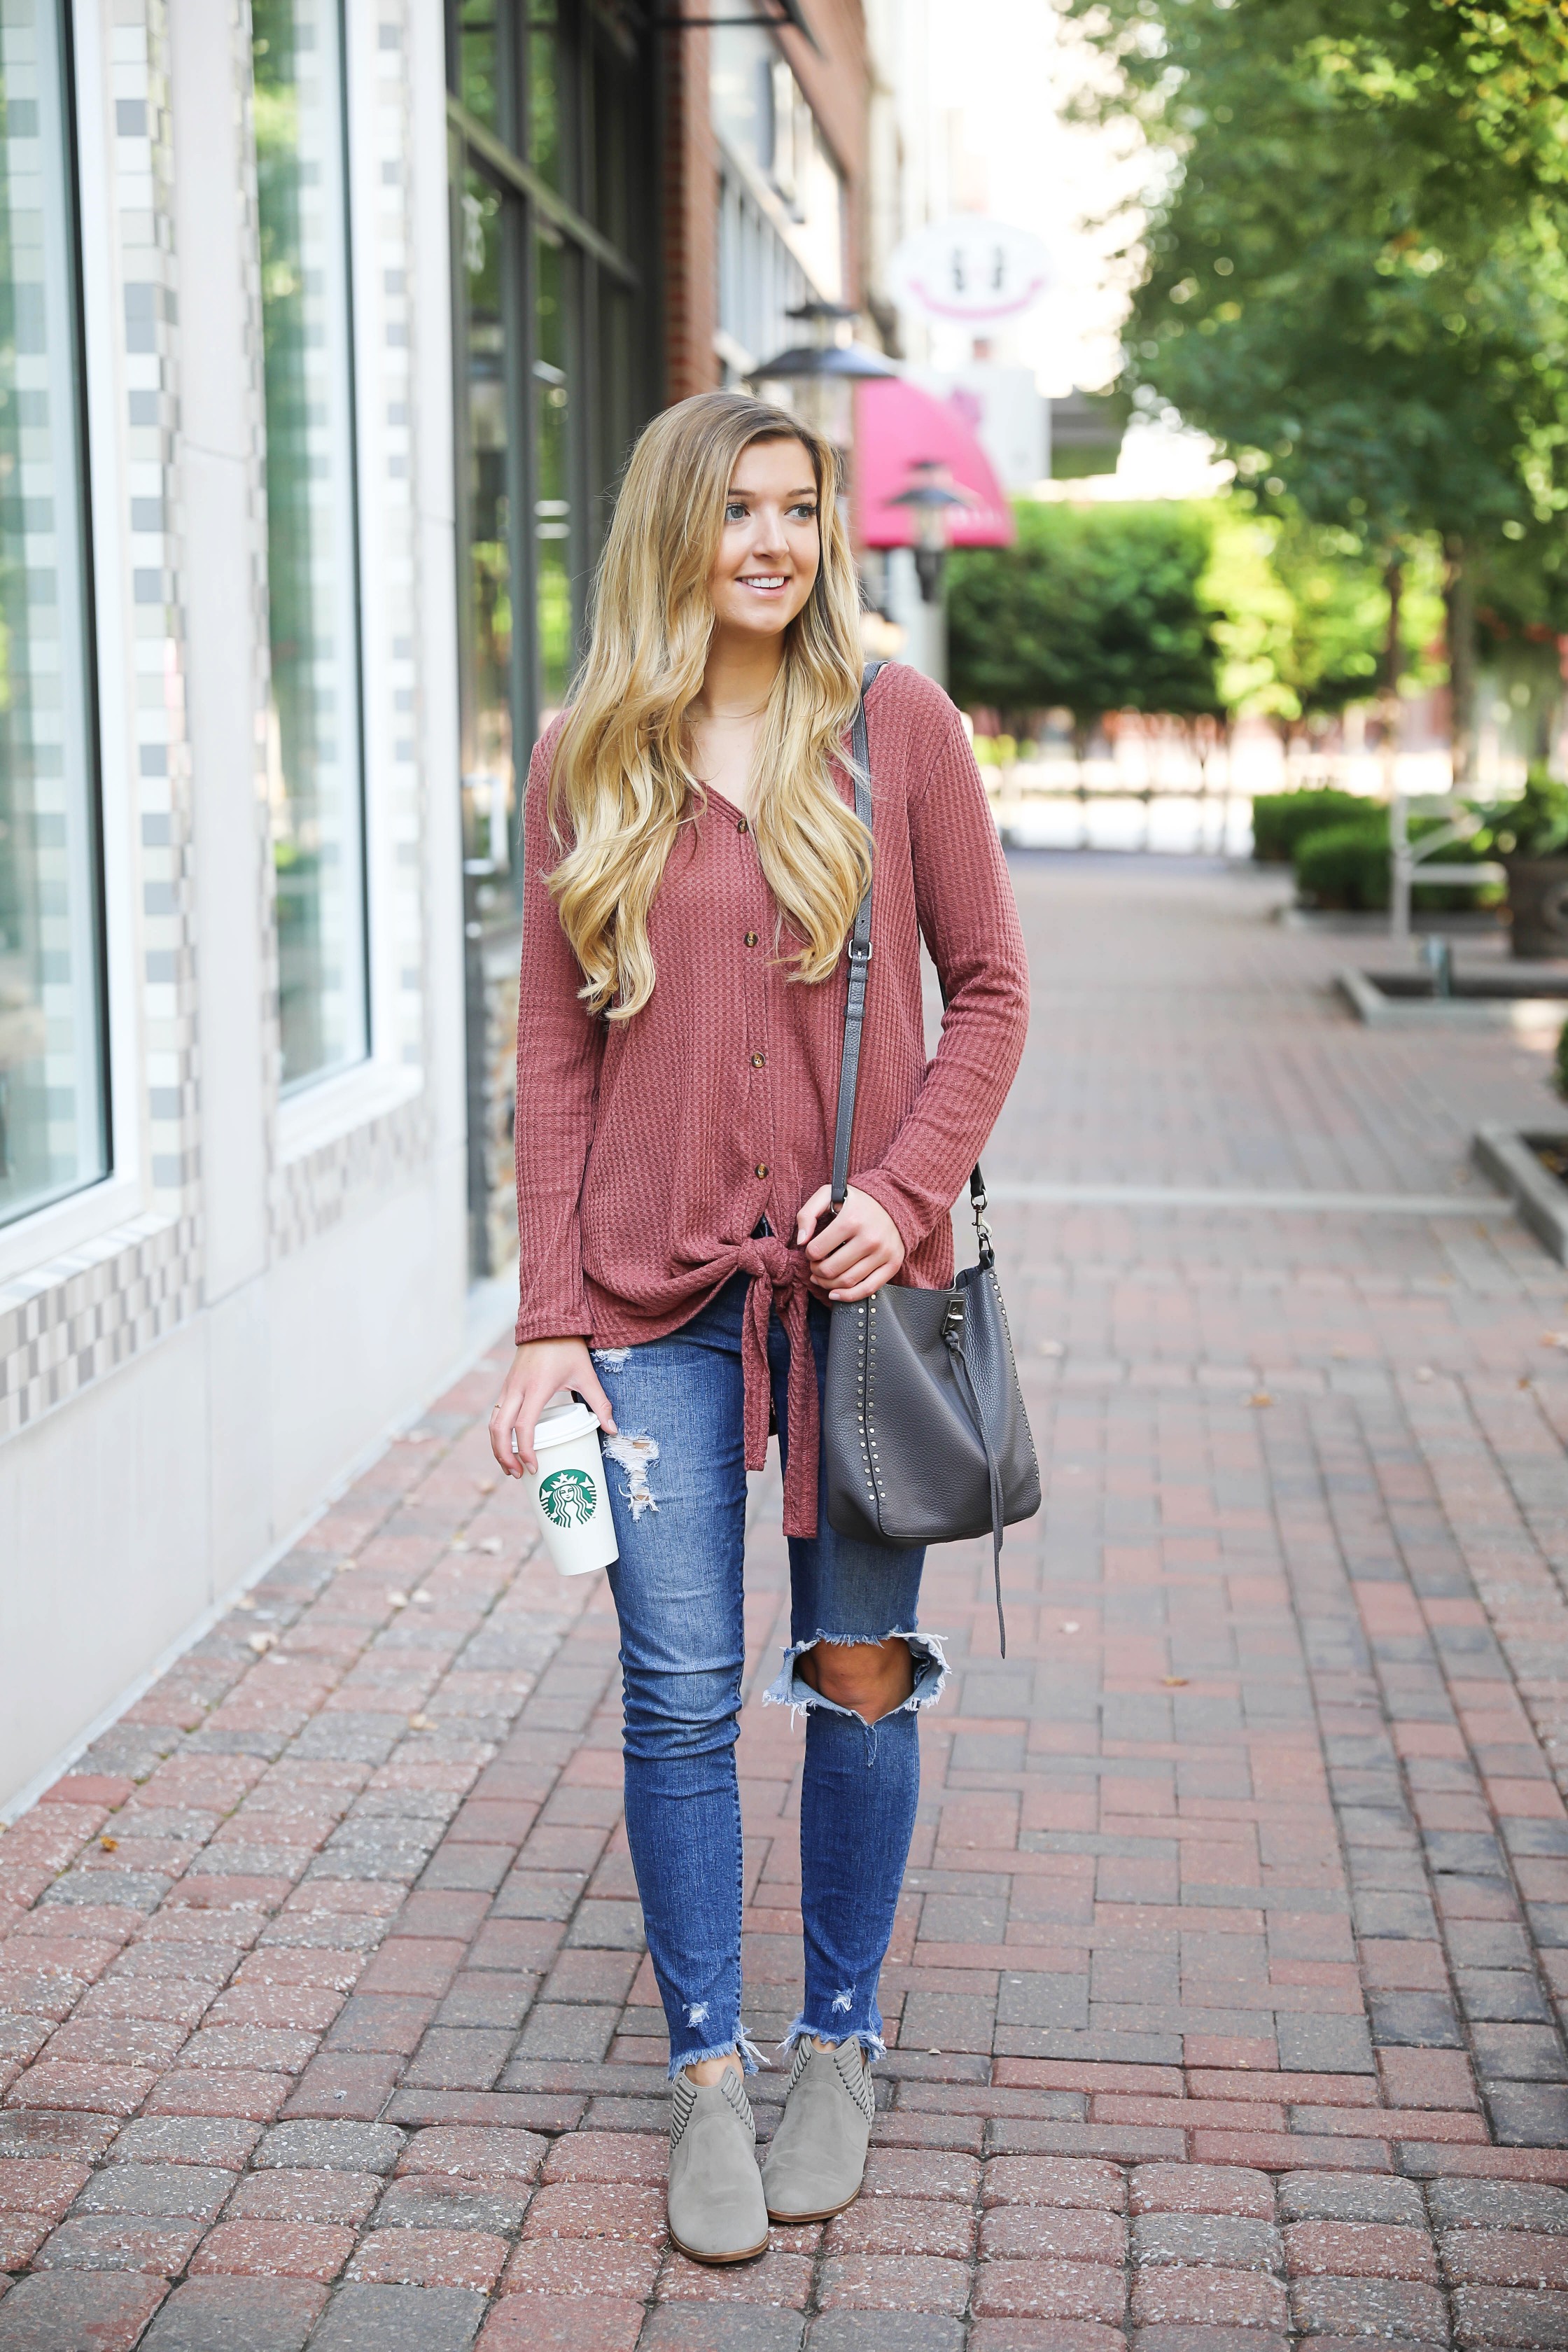 Burgundy waffle top! These waffle tops are all the rage, I love when they are tied on the end! It comes in a ton of cute fall colors. I paired mine with ripped denim jeans and this cute Rebecca Minkoff purse! Such a cute fall outfit for back to school! Details on fashion blog daily dose of charm by lauren lindmark